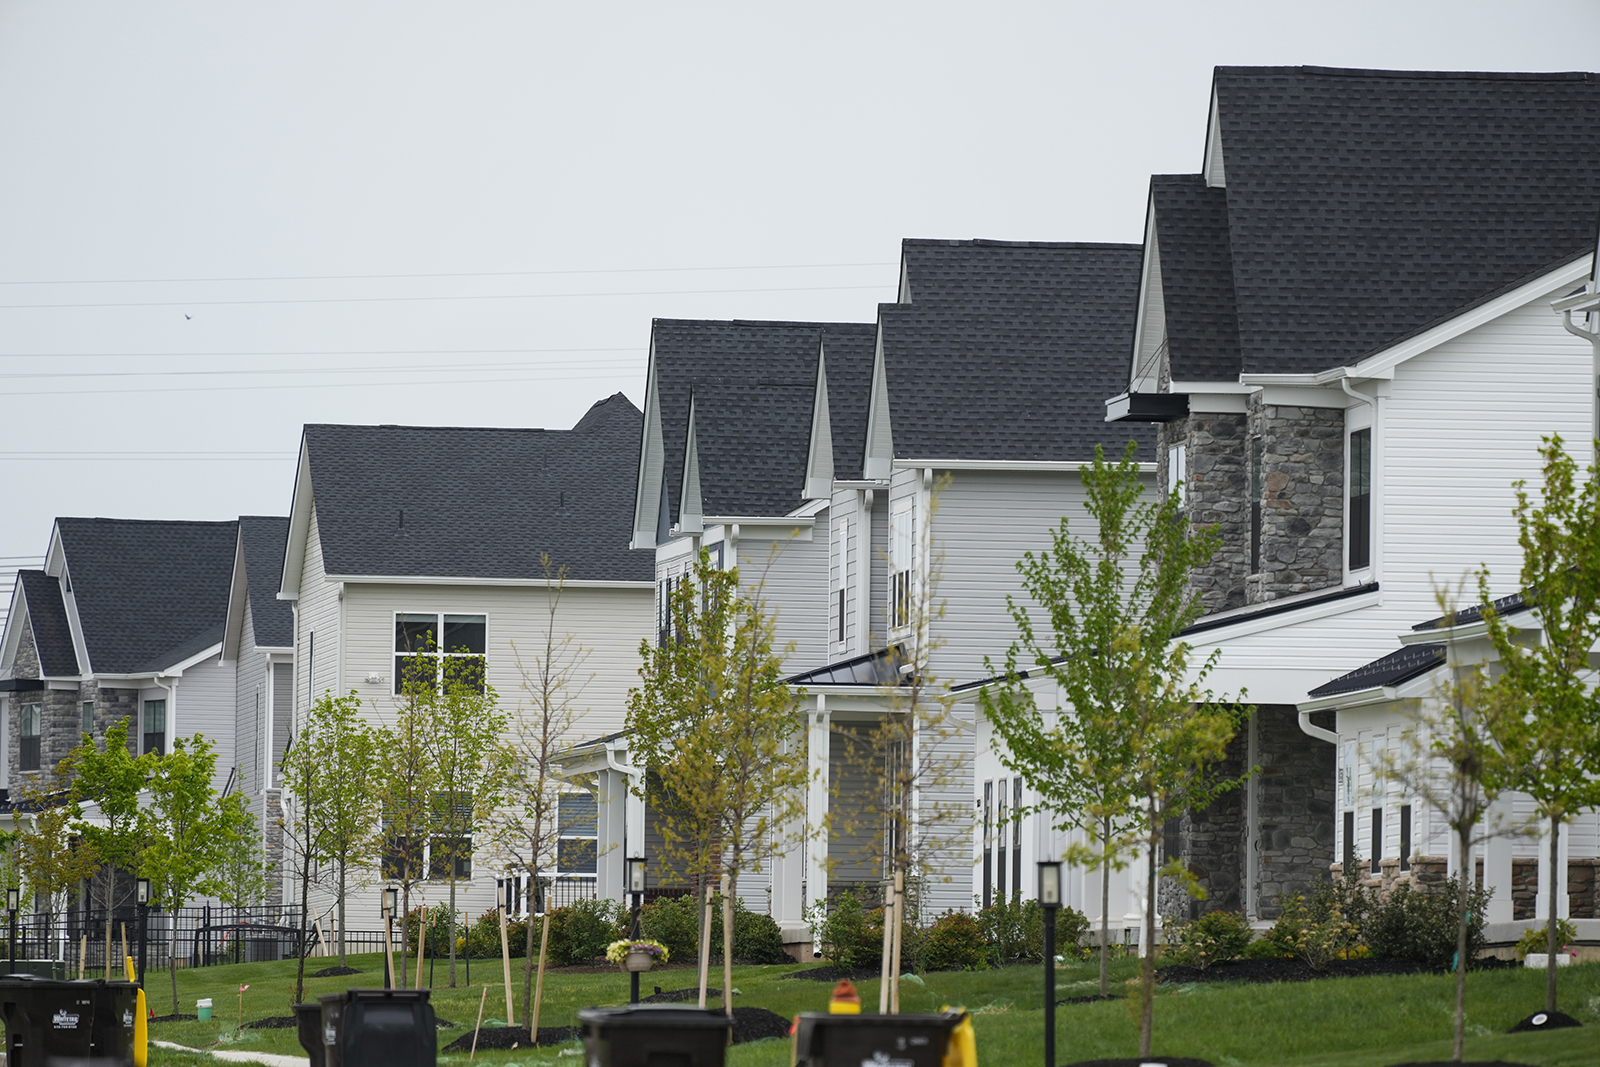 New homes line a street in Eagleville, PA, on April 28.